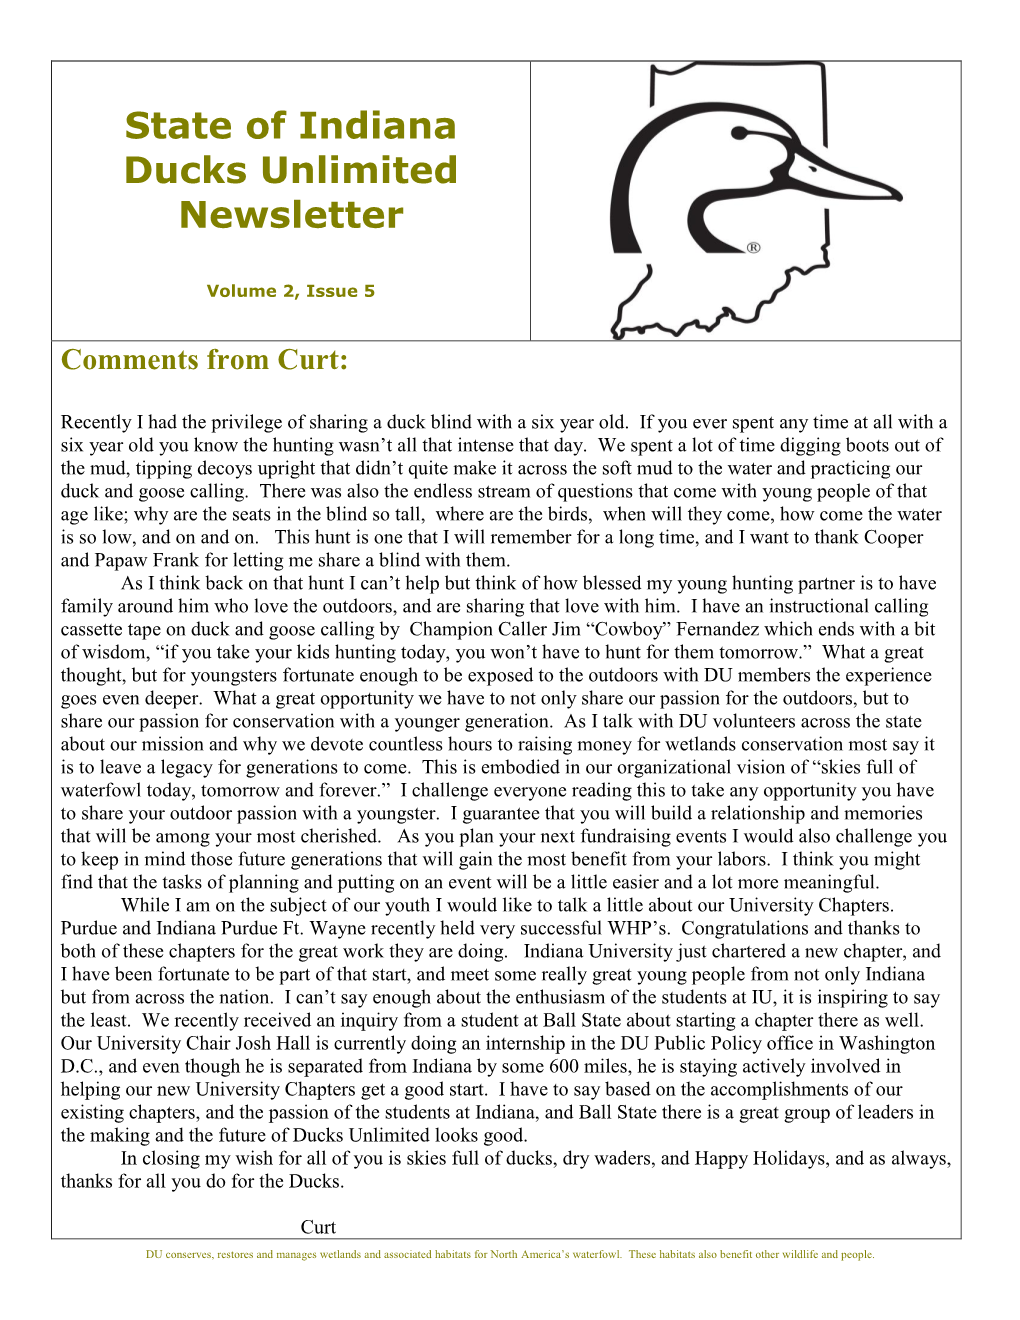 State of Indiana Ducks Unlimited Newsletter